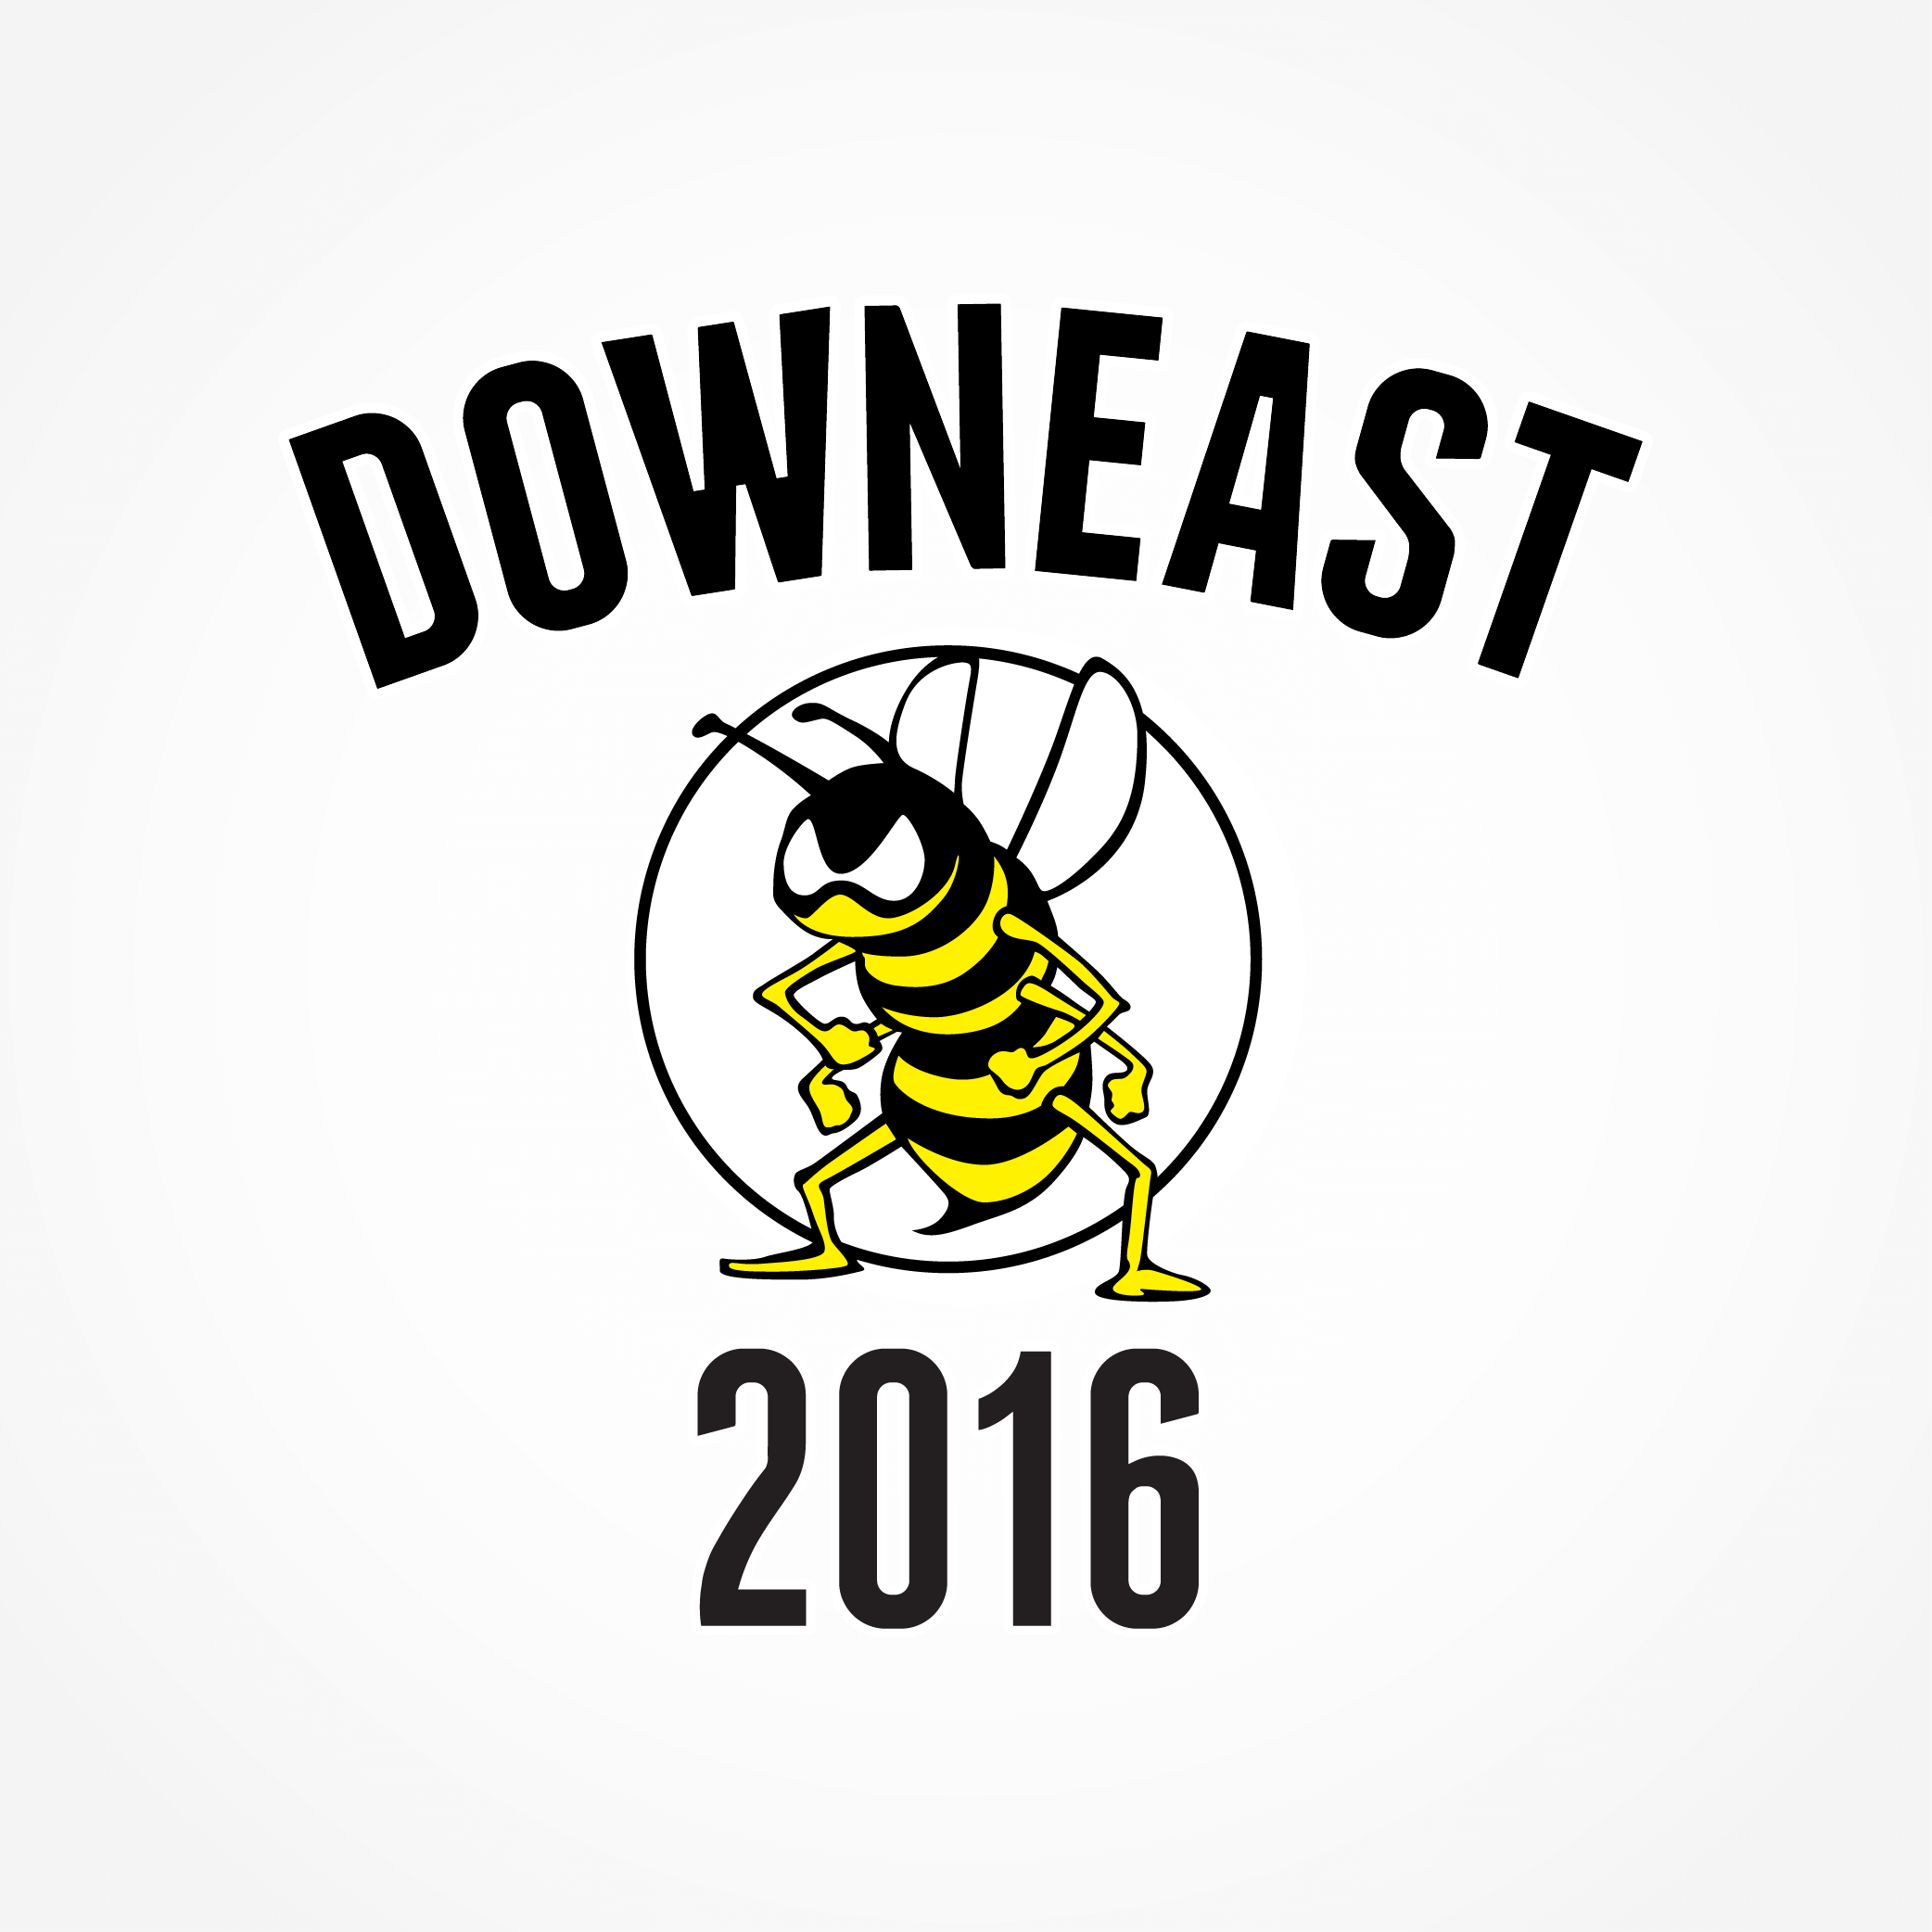 logo for the Downeast Spelling Bee